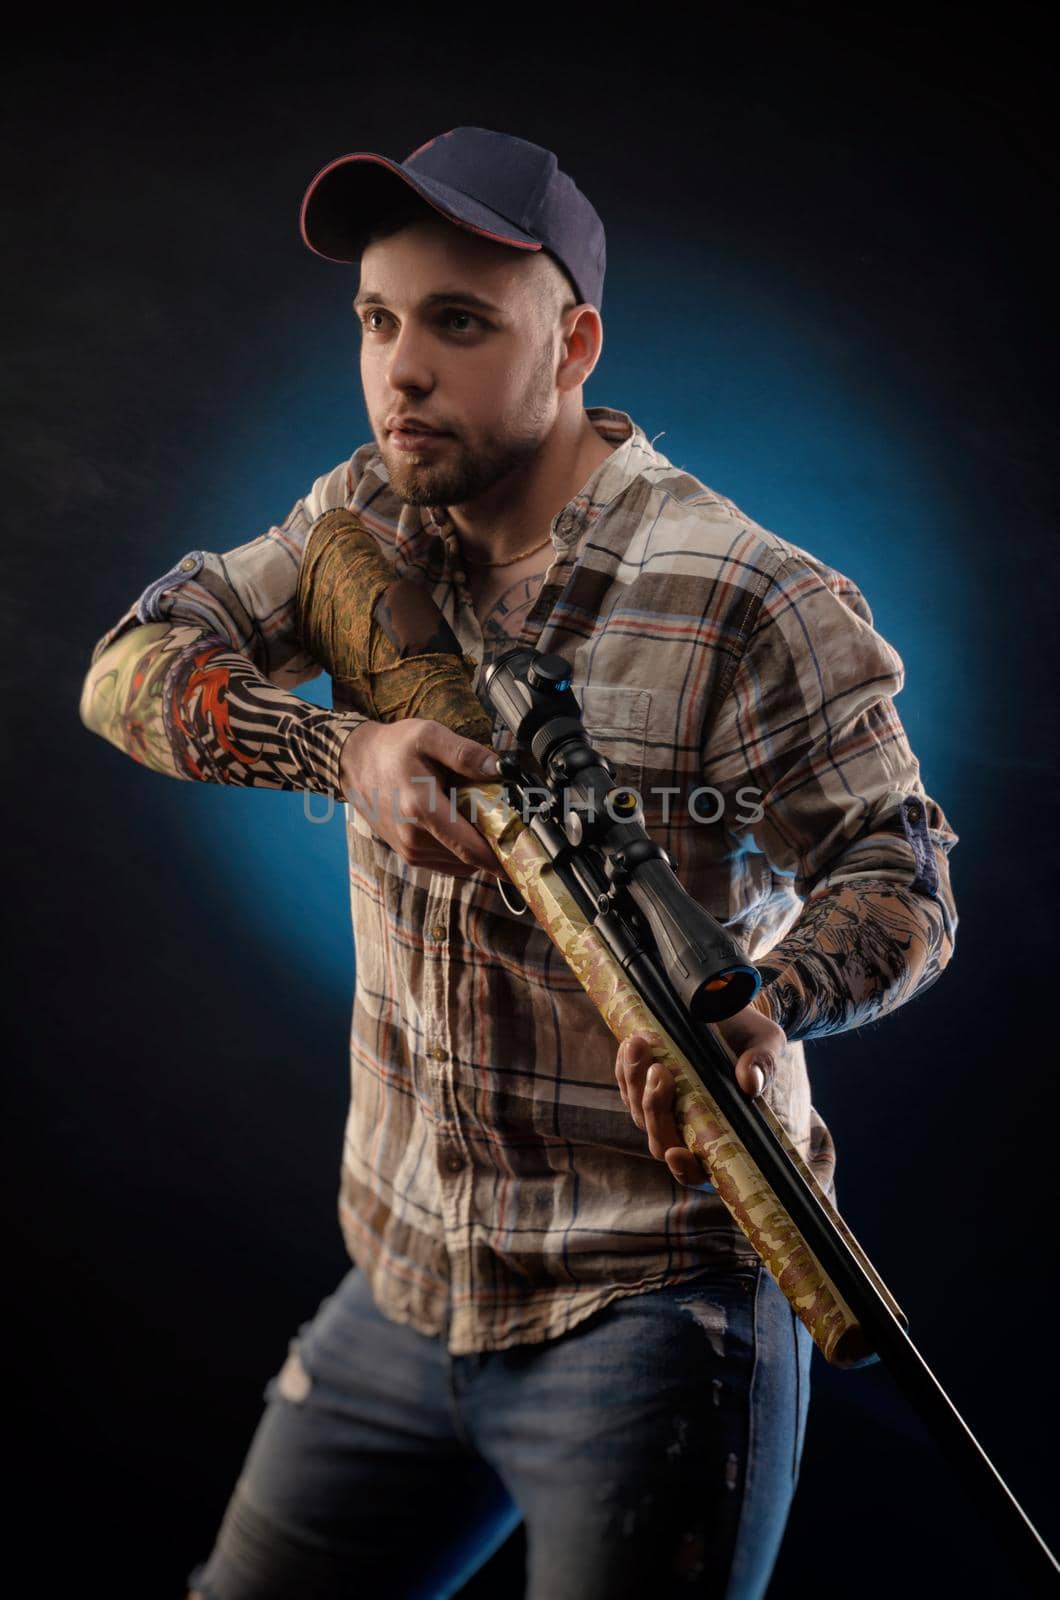 the guy in the shirt with the rifle by Rotozey